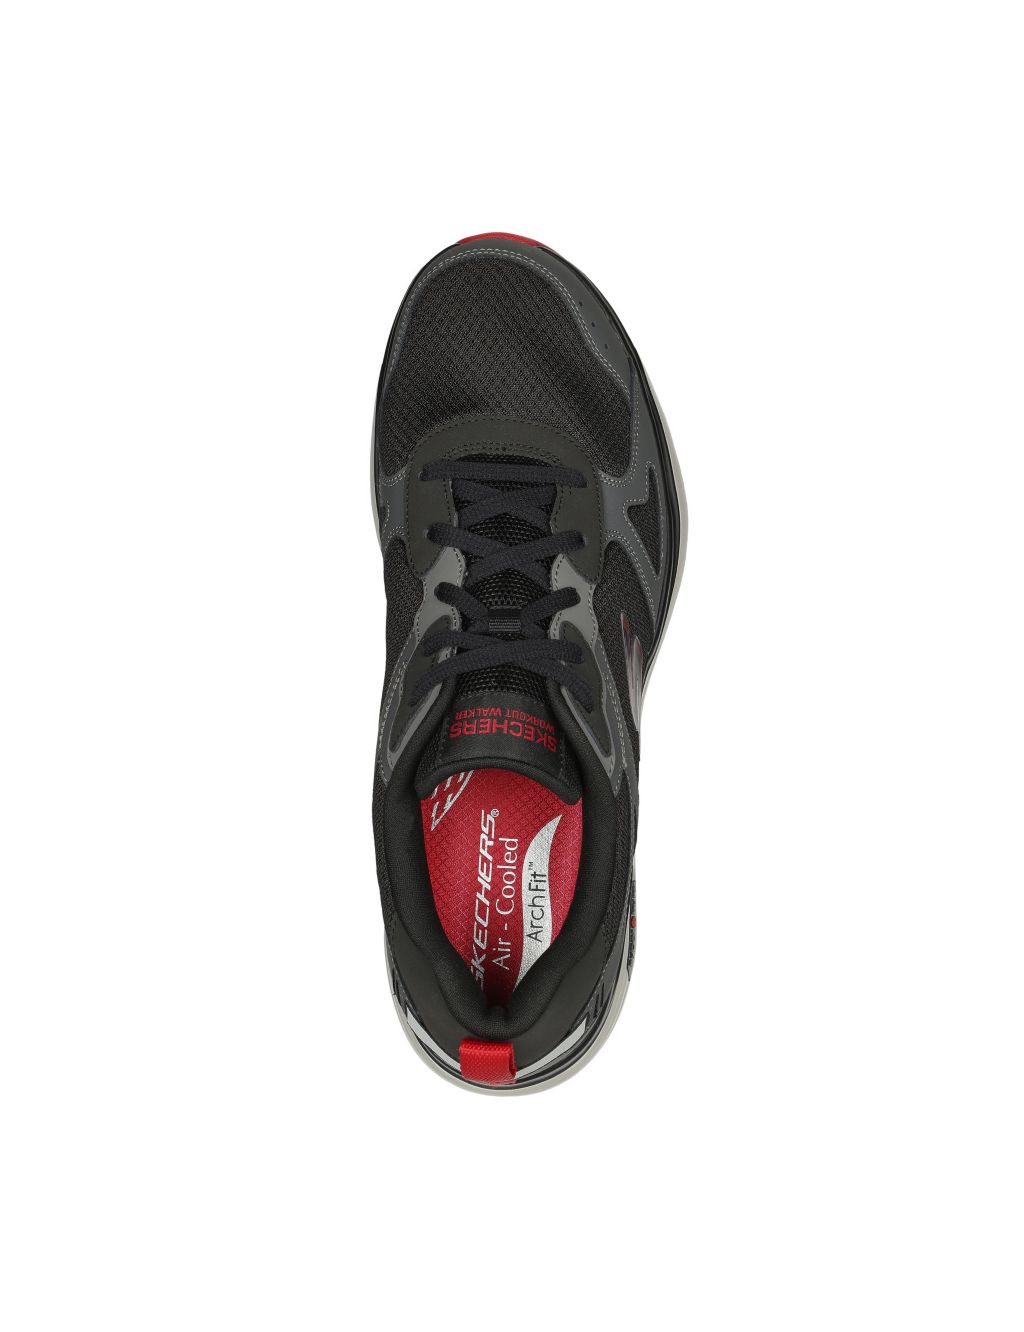 GO WALK Workout Walker Leather Trainers image 3